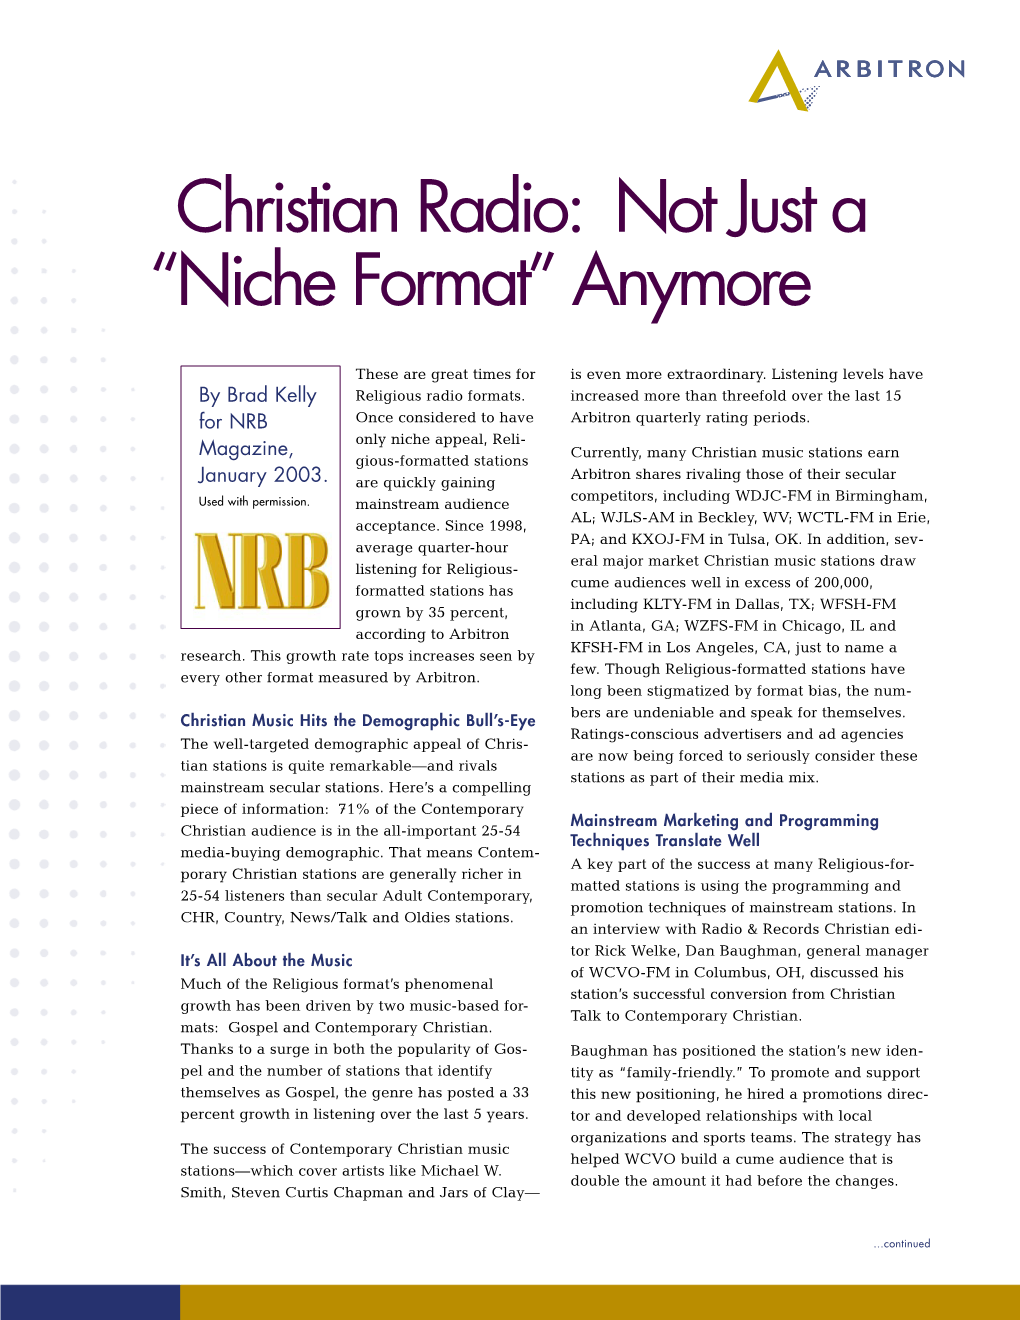 Christian Radio: Not Just a “Niche Format” Anymore